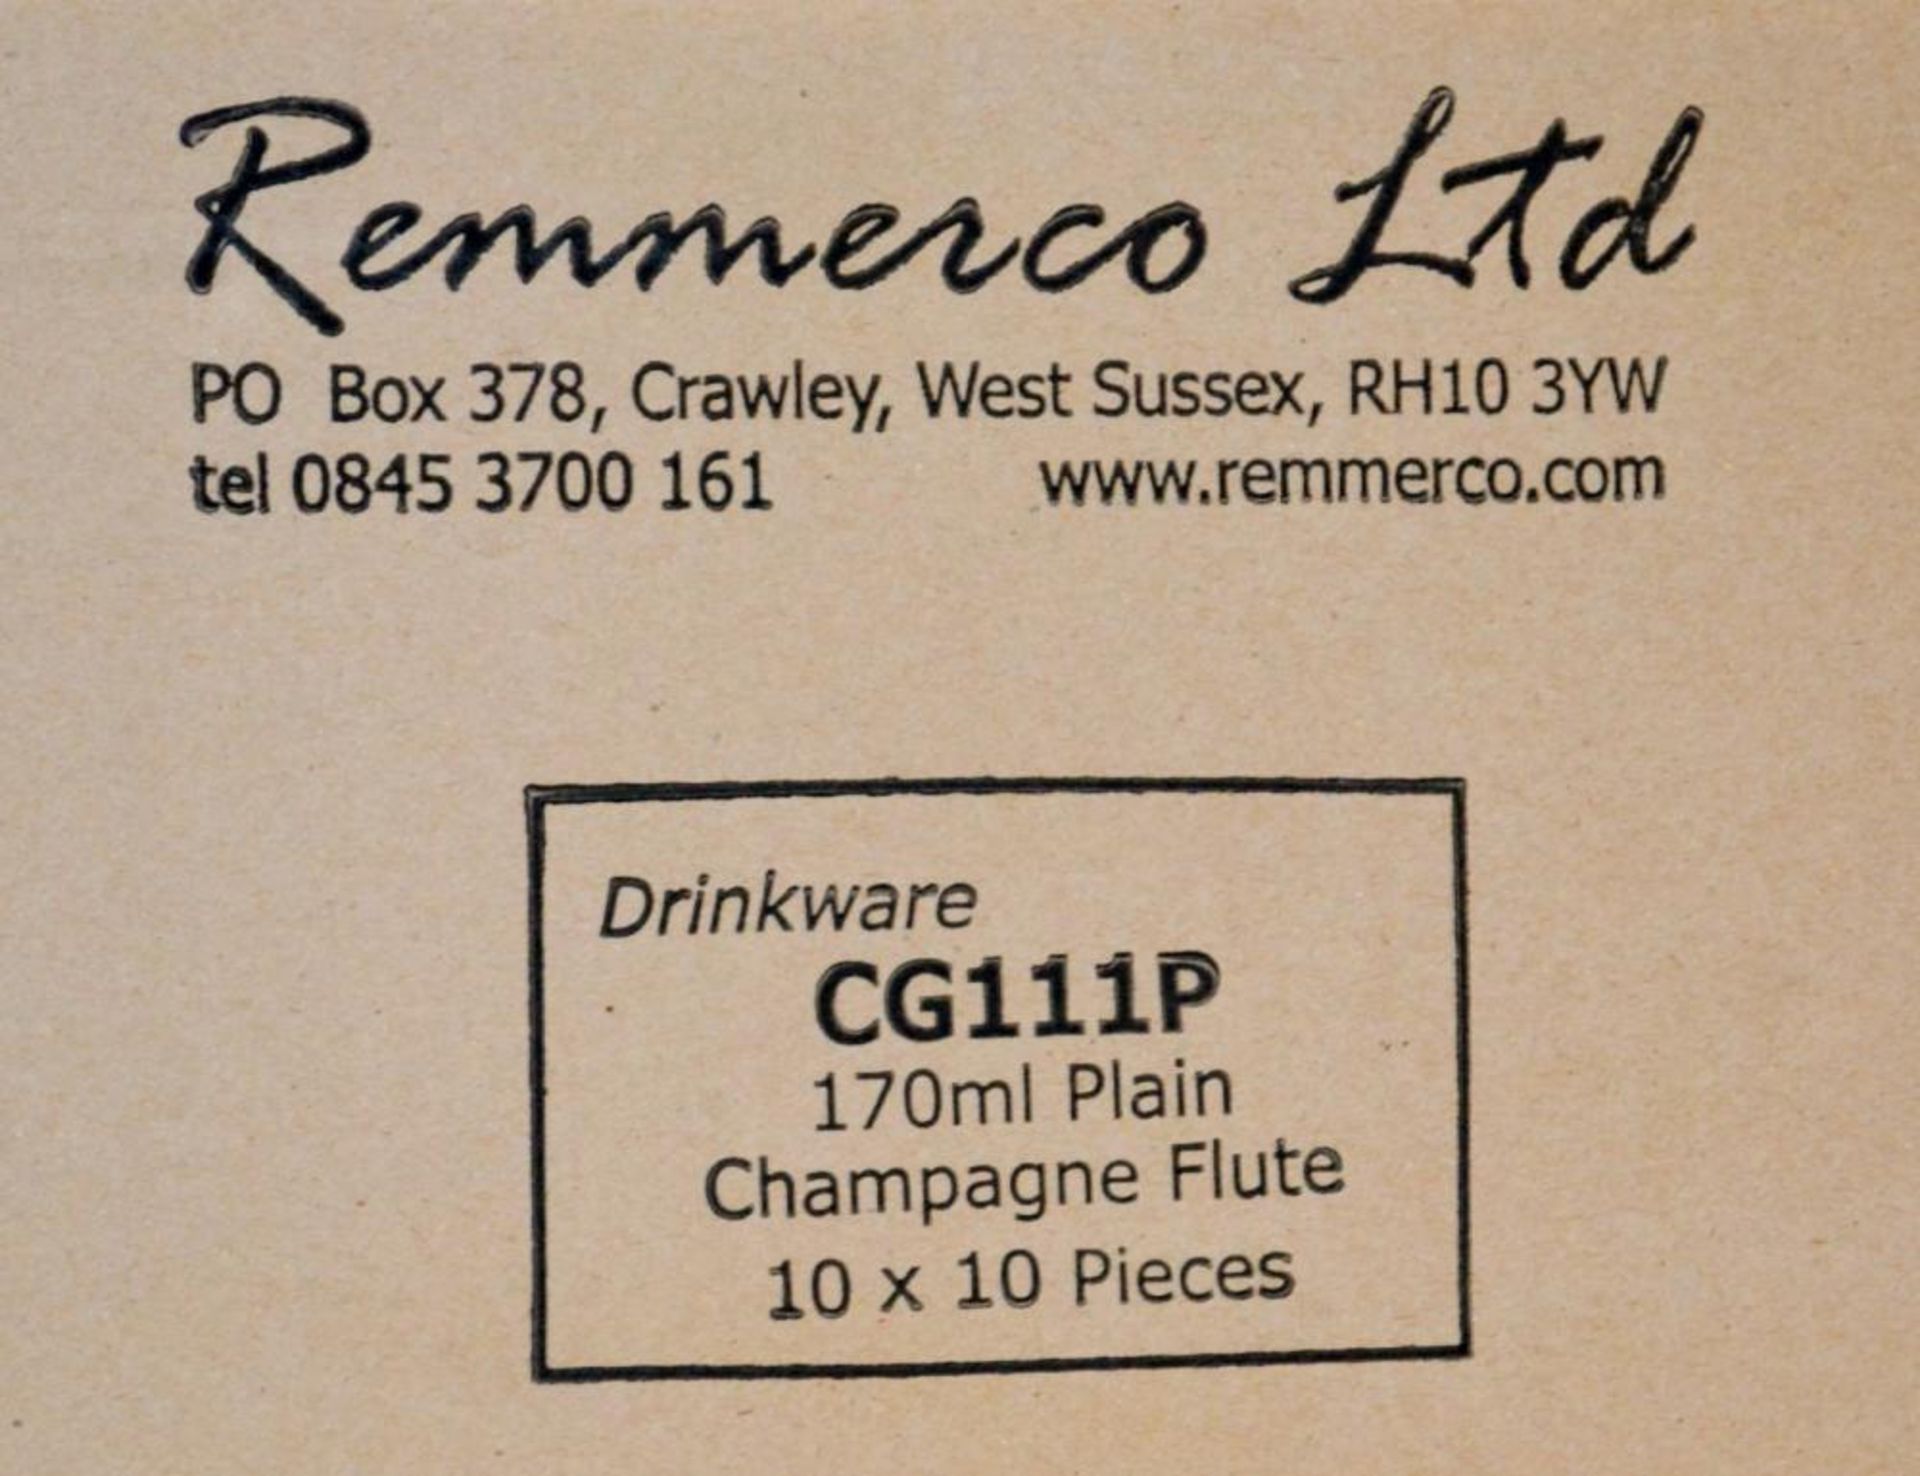 1,000 x Disposable Clear Plastic Champagne Flutes (170ml) - Brand: Remmerco CG111P - Brand New - Image 2 of 4